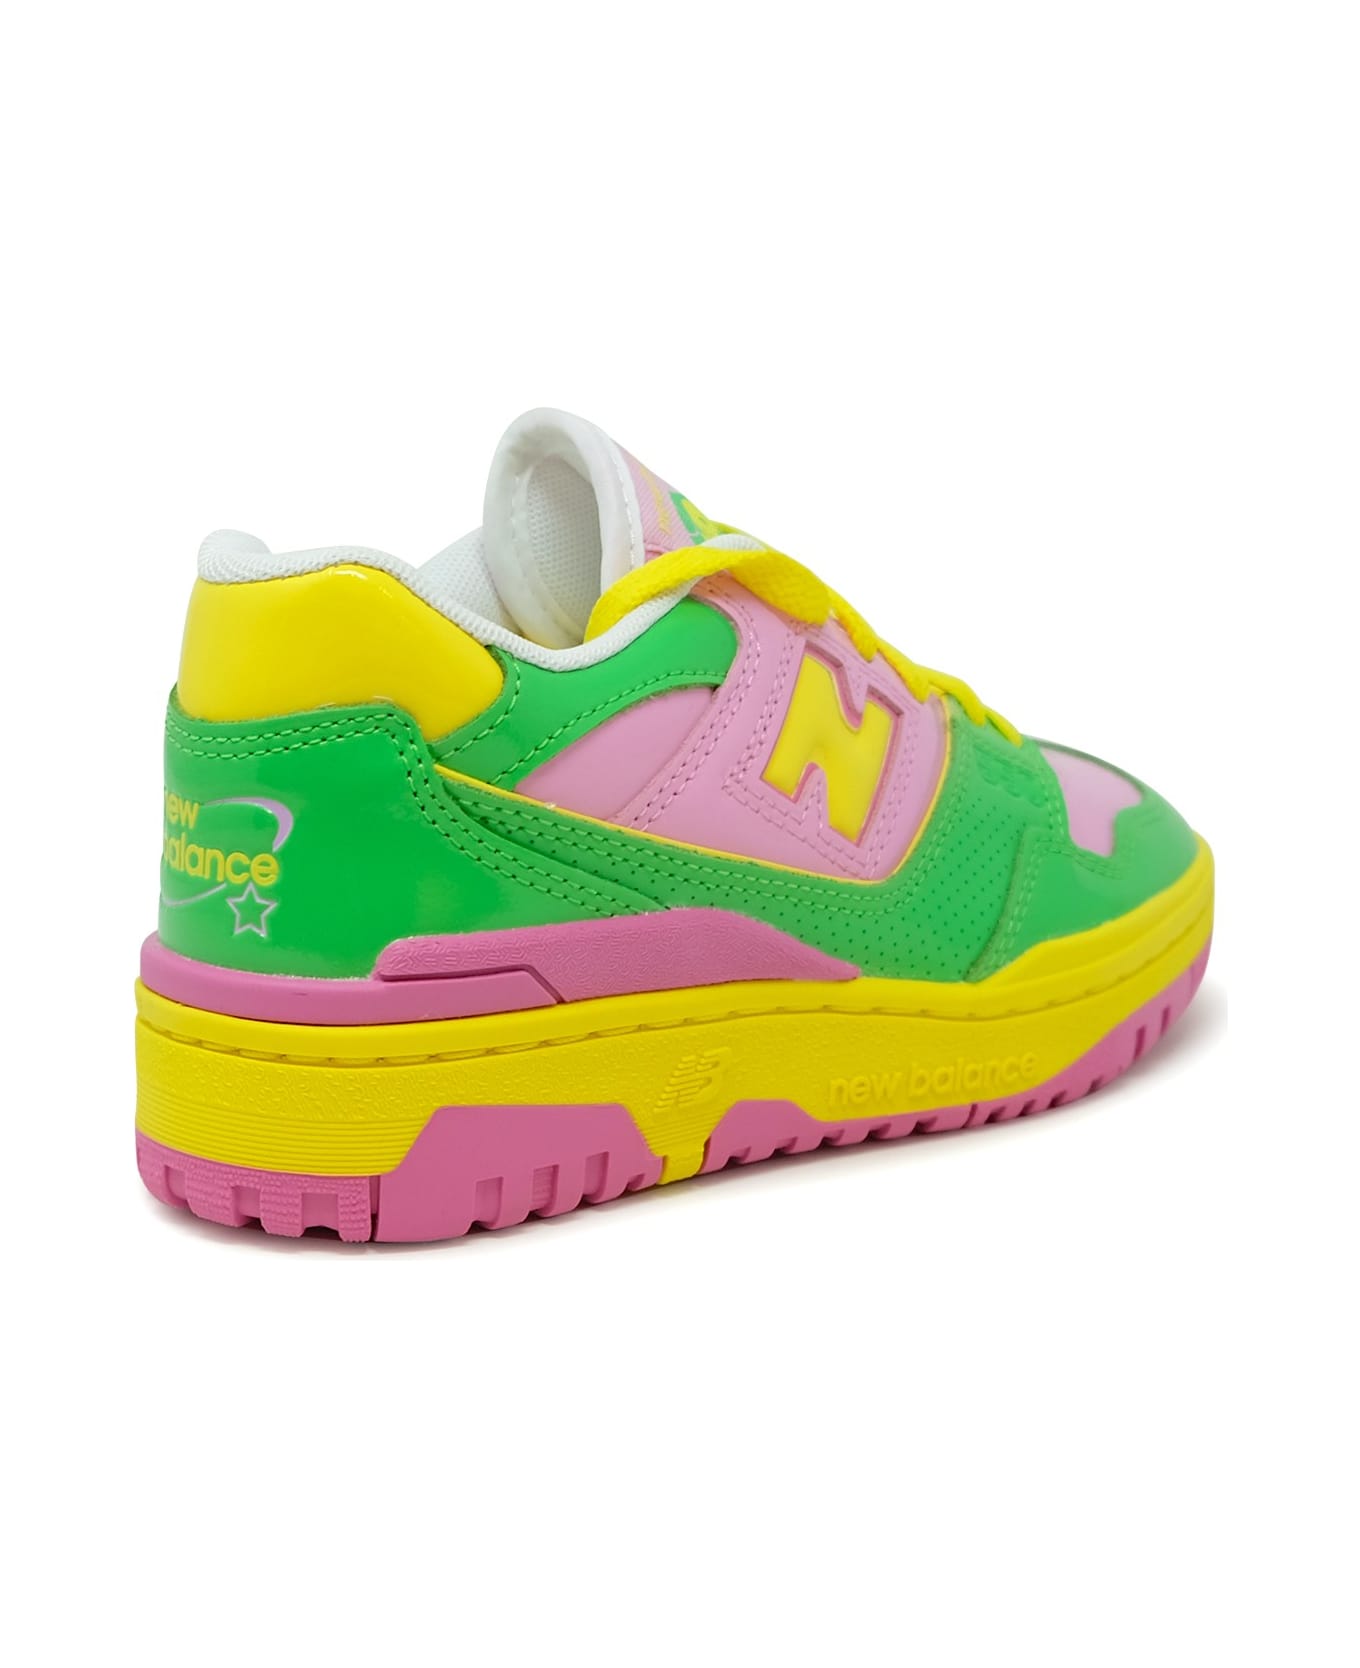 New Balance Multicolor Leather Sneaker - Pink